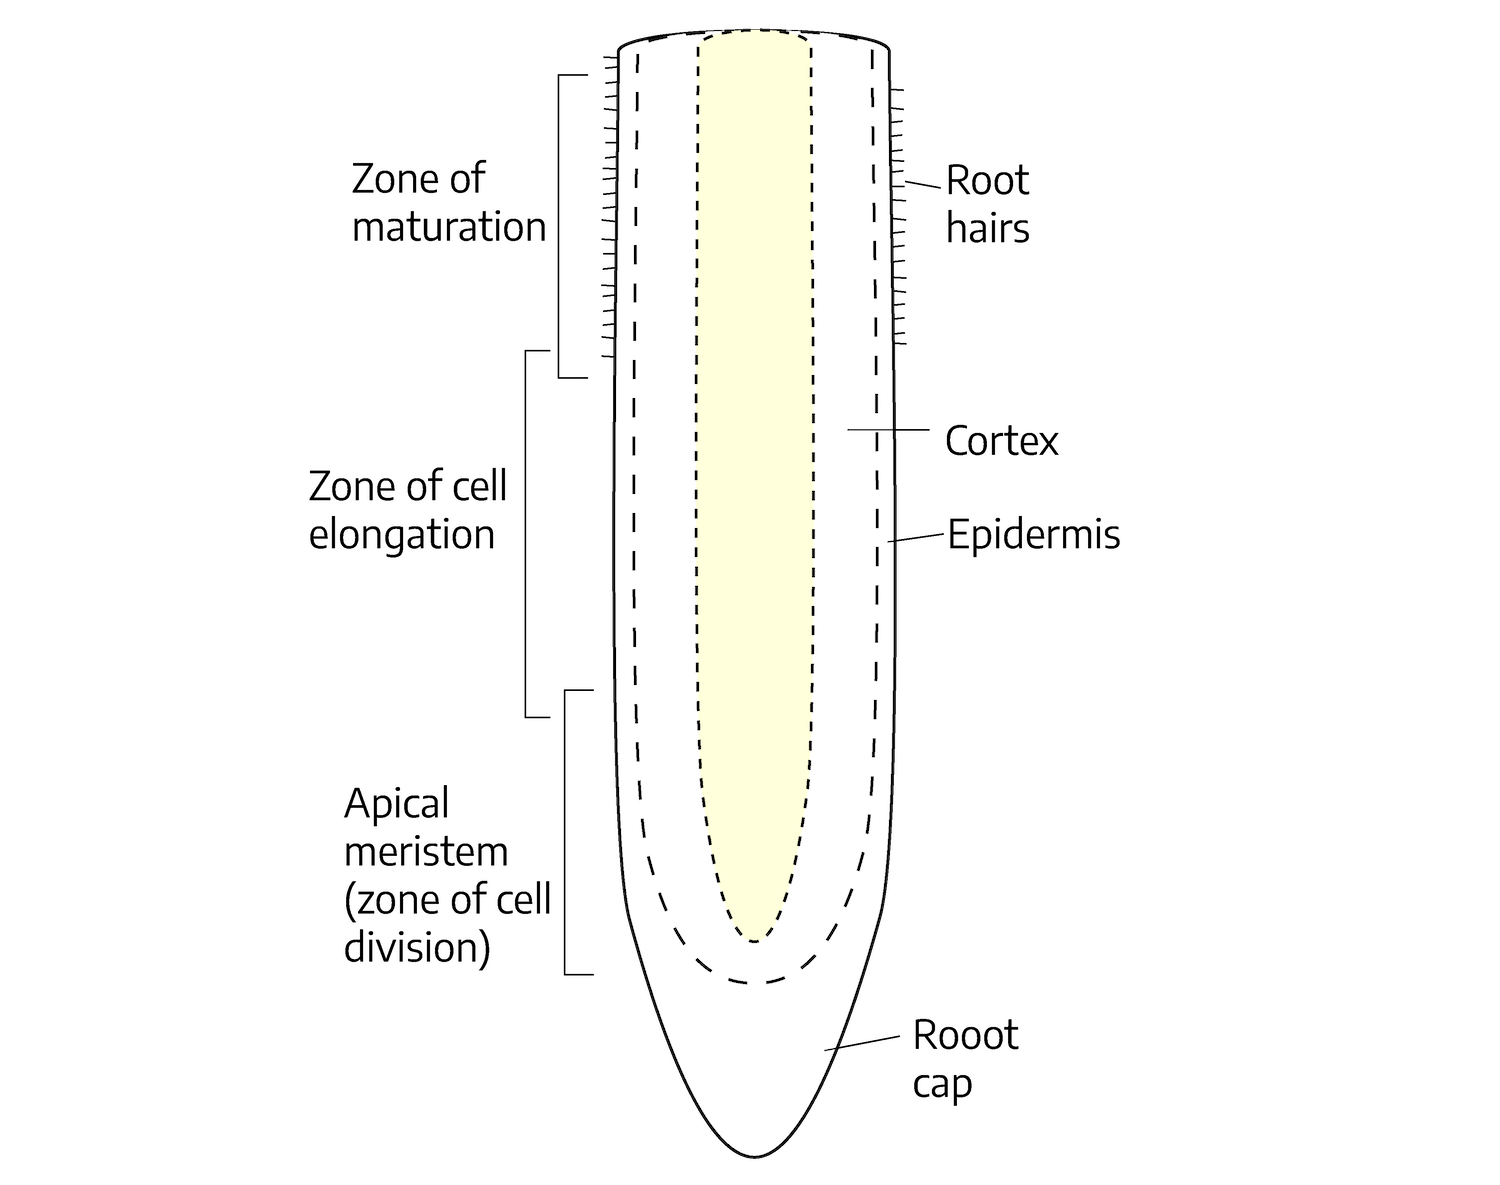 A part of a root tip shaped as an elongated cylinder that comes to a rounded point at the tip. Within the root there are three sections, the inner section, the cortex, and the outer section which is the epidermis. Along the top of the root is the zone of maturation containing root hairs. After this section is the zone of cell elongation, following this is the apical meristem (zone of cell division). At the rounded point of the root is the root cap.